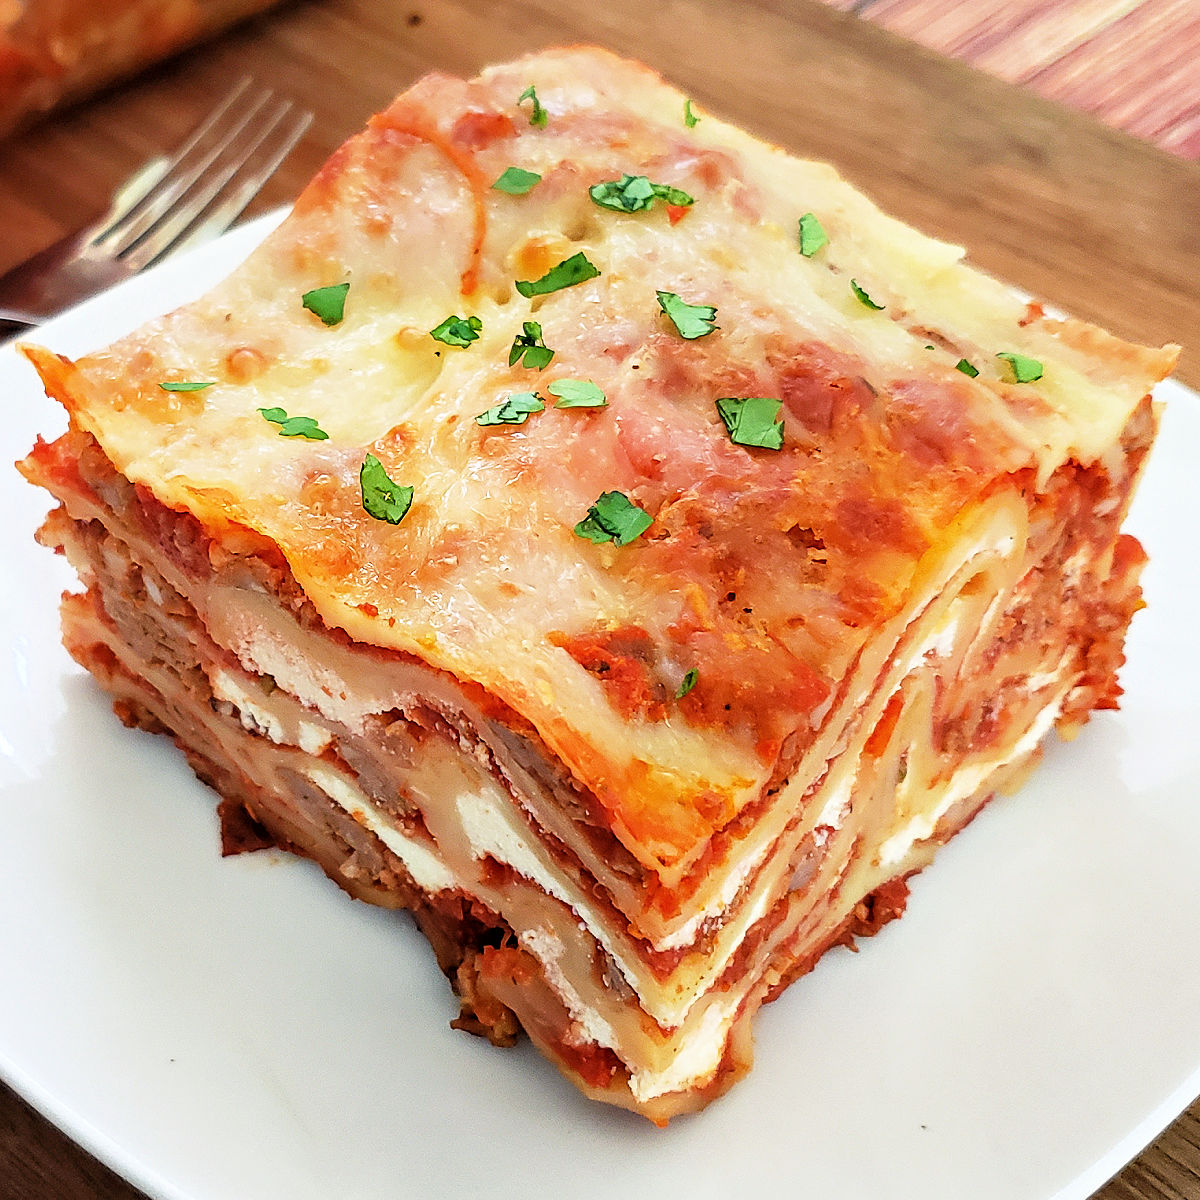 Close up of homemade gluten free lasagna so you can see the layers of ingredients.